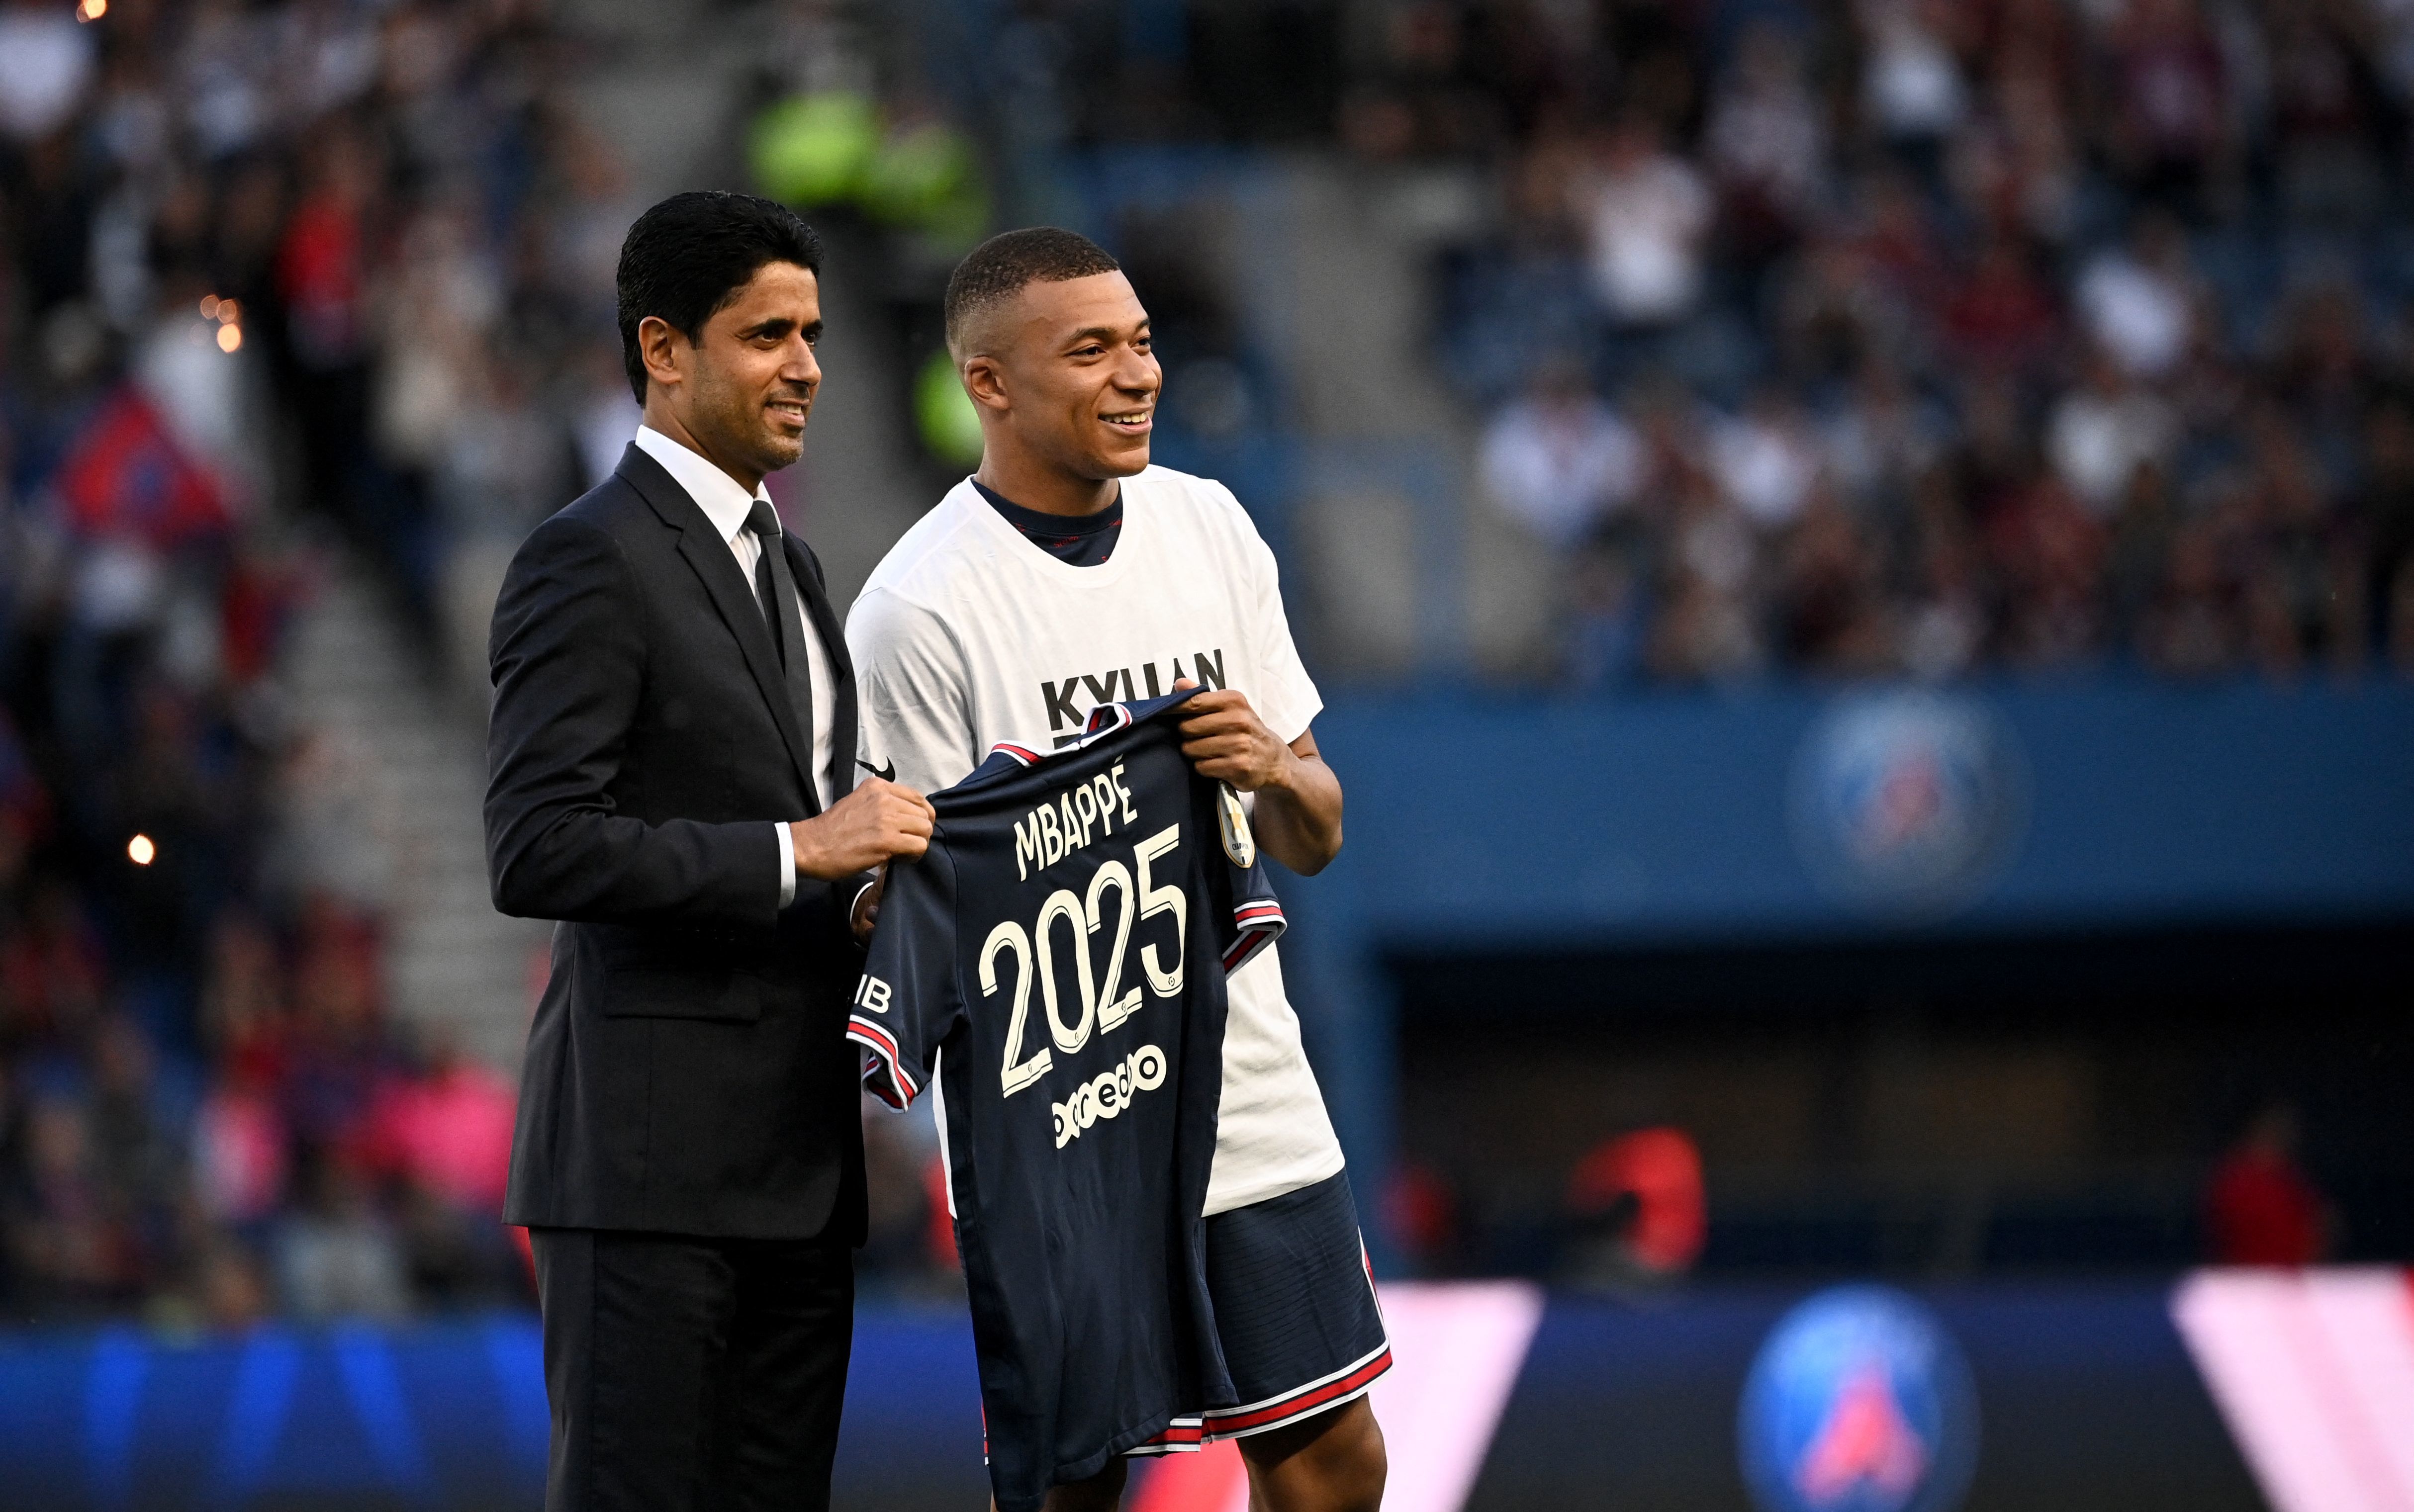 Madrid's offer, plus his salary, was already better than ours: Al-Khelaifi on Mbappe deal